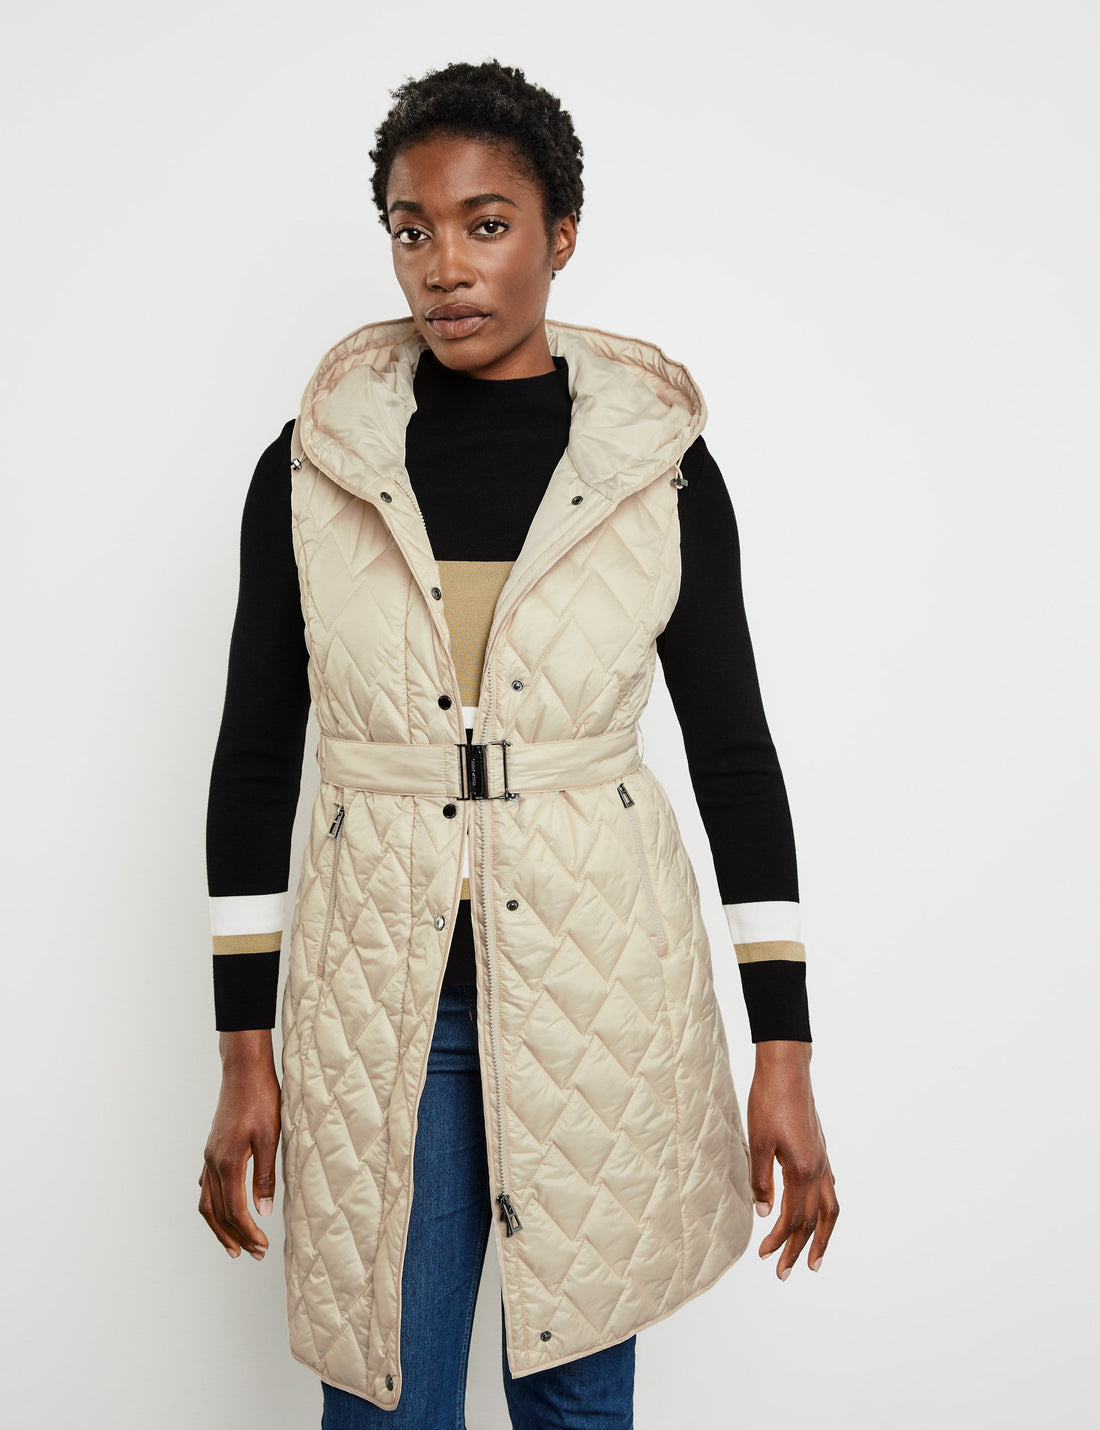 Quilted Body Warmer With A Waist Belt And Hood_240350-31193_90031_01